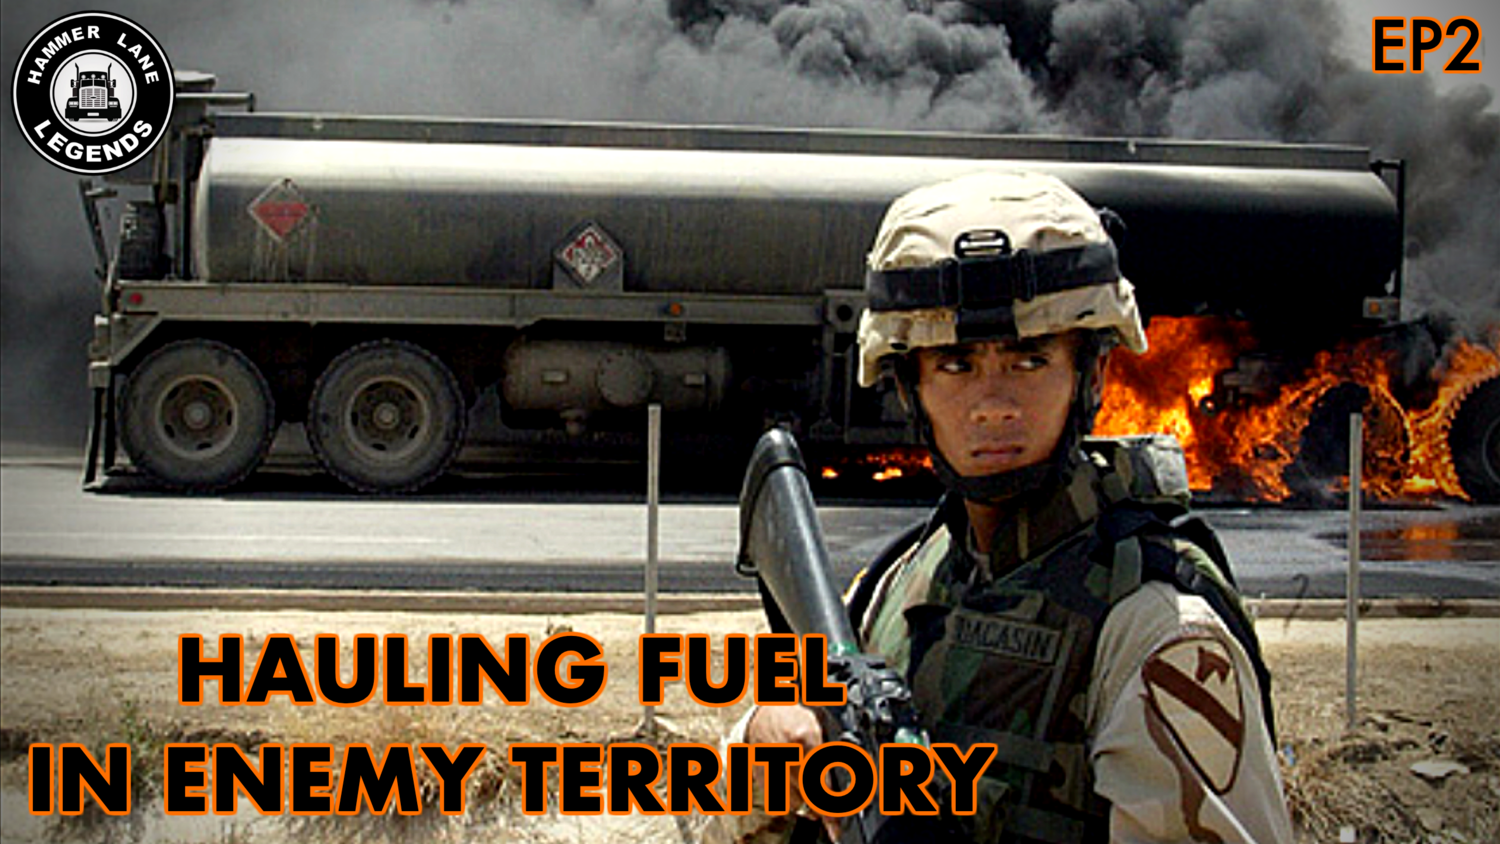 Fuel in Enemy Territory, Tony and Brian are joined by Sam, who served as a ...